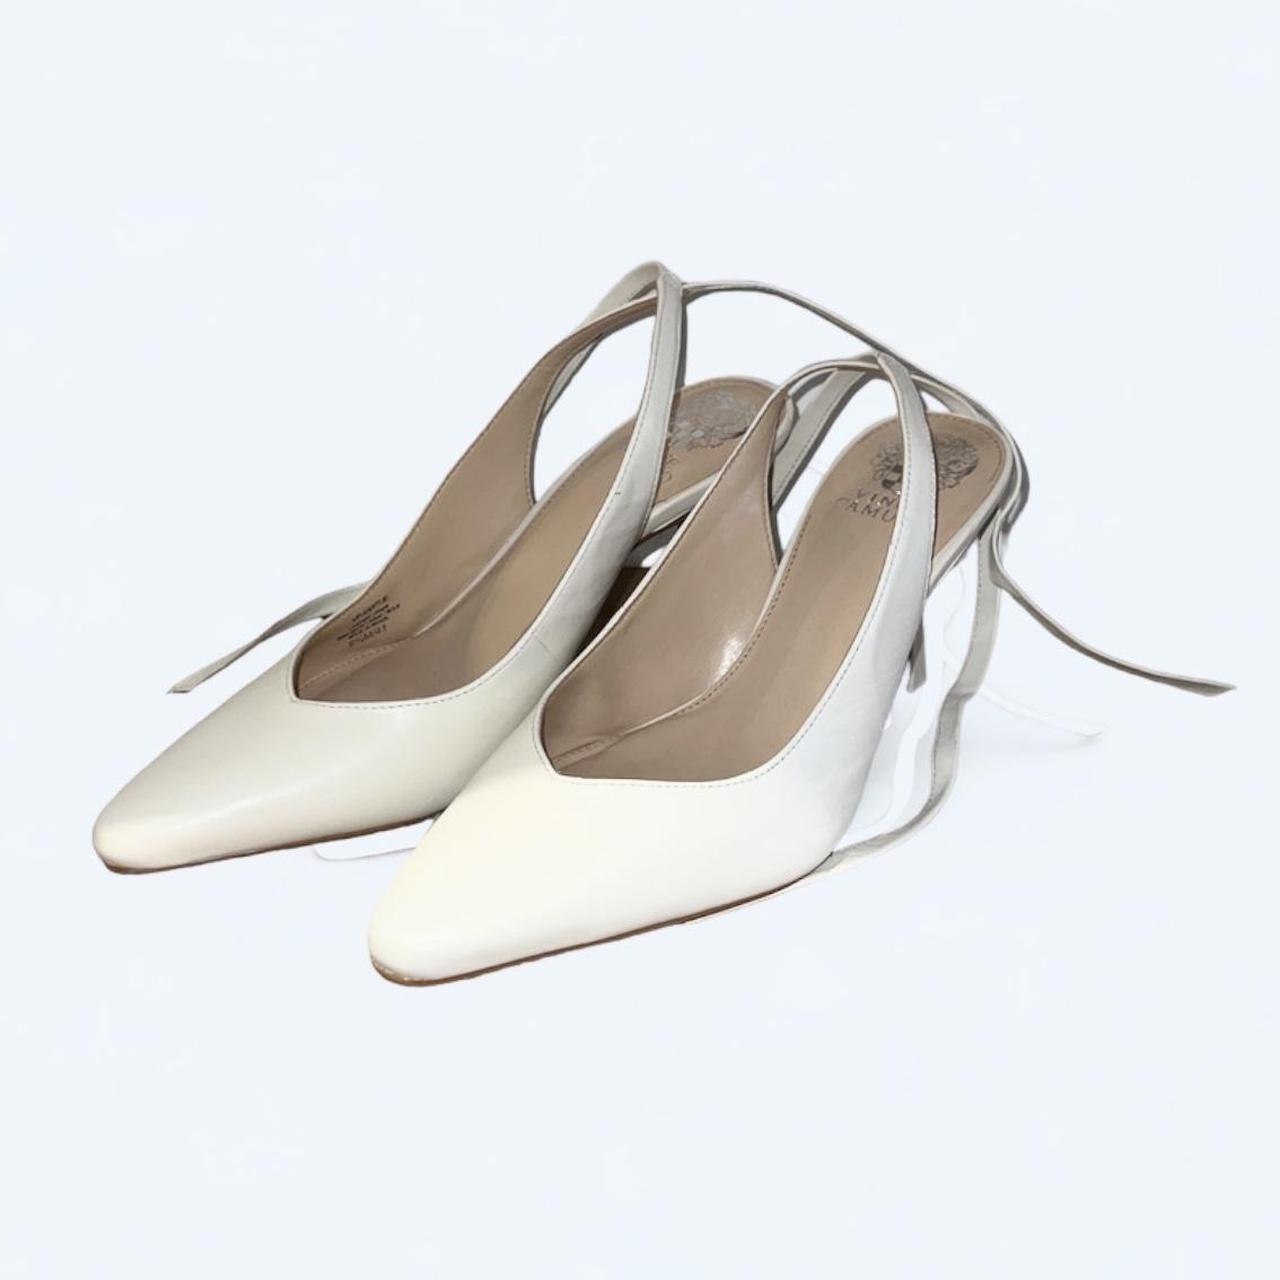 Vince Camuto Women's Cream and White Courts